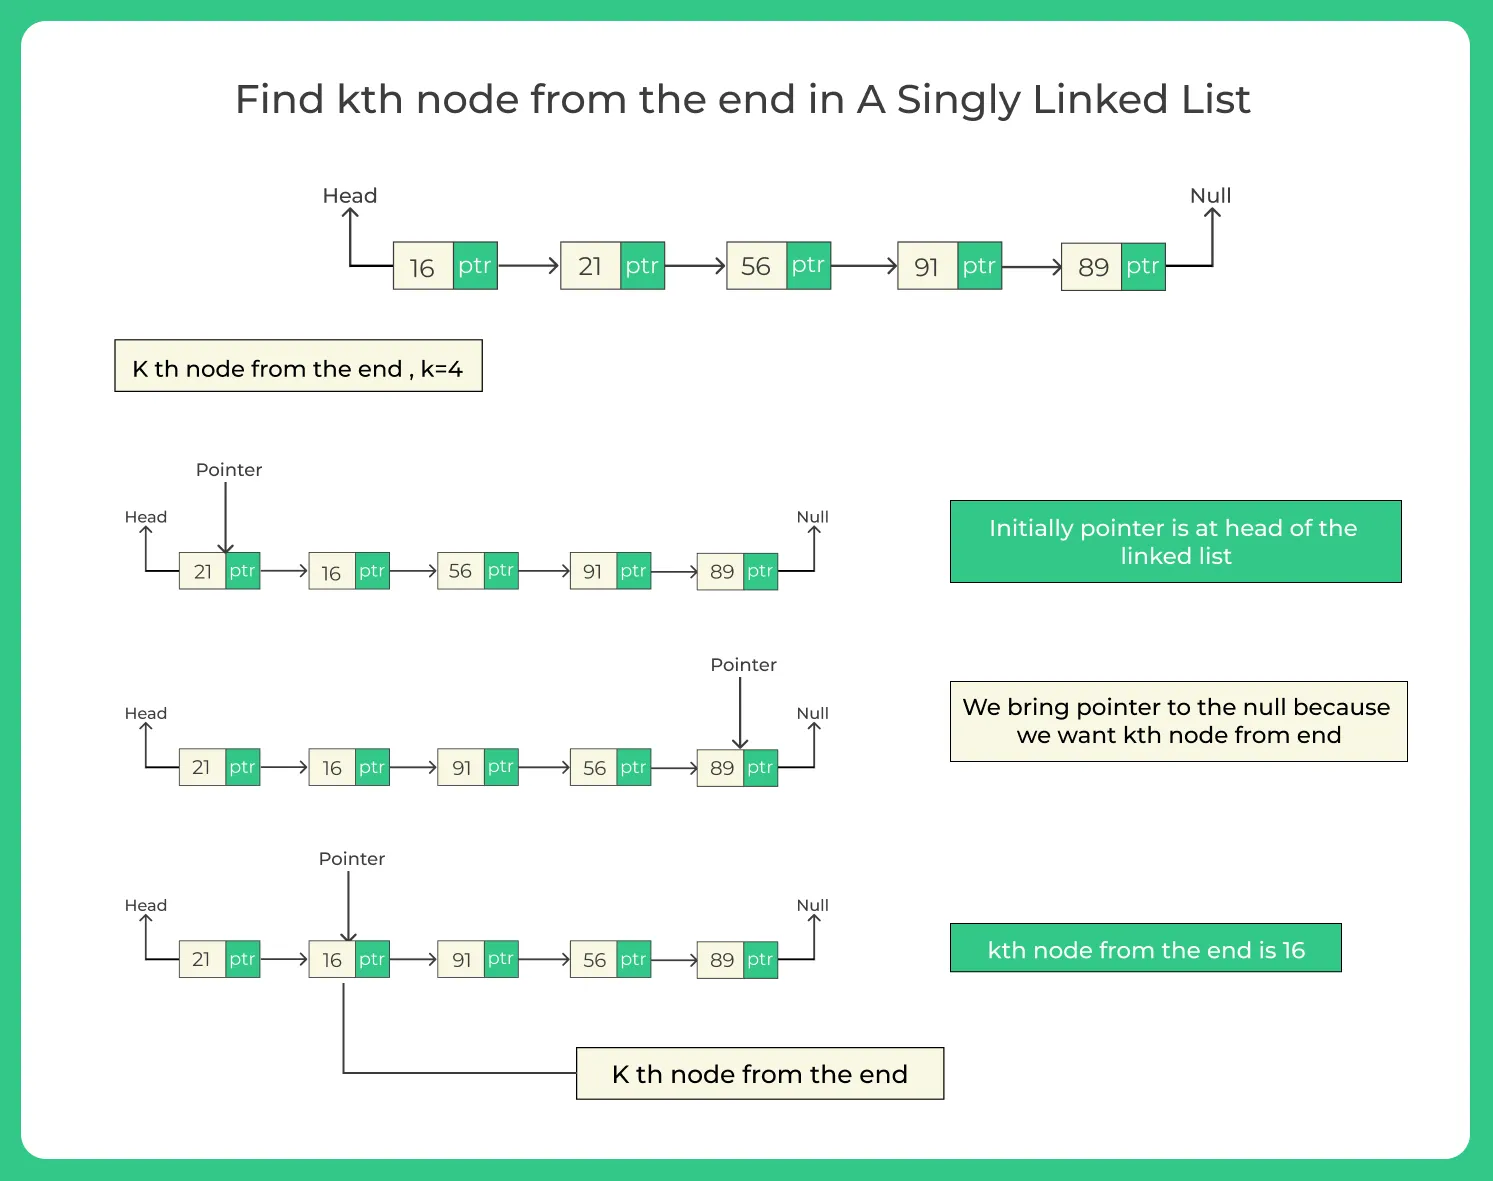 find-kth-node-from-the-end-in-A-Singly-Linked-List